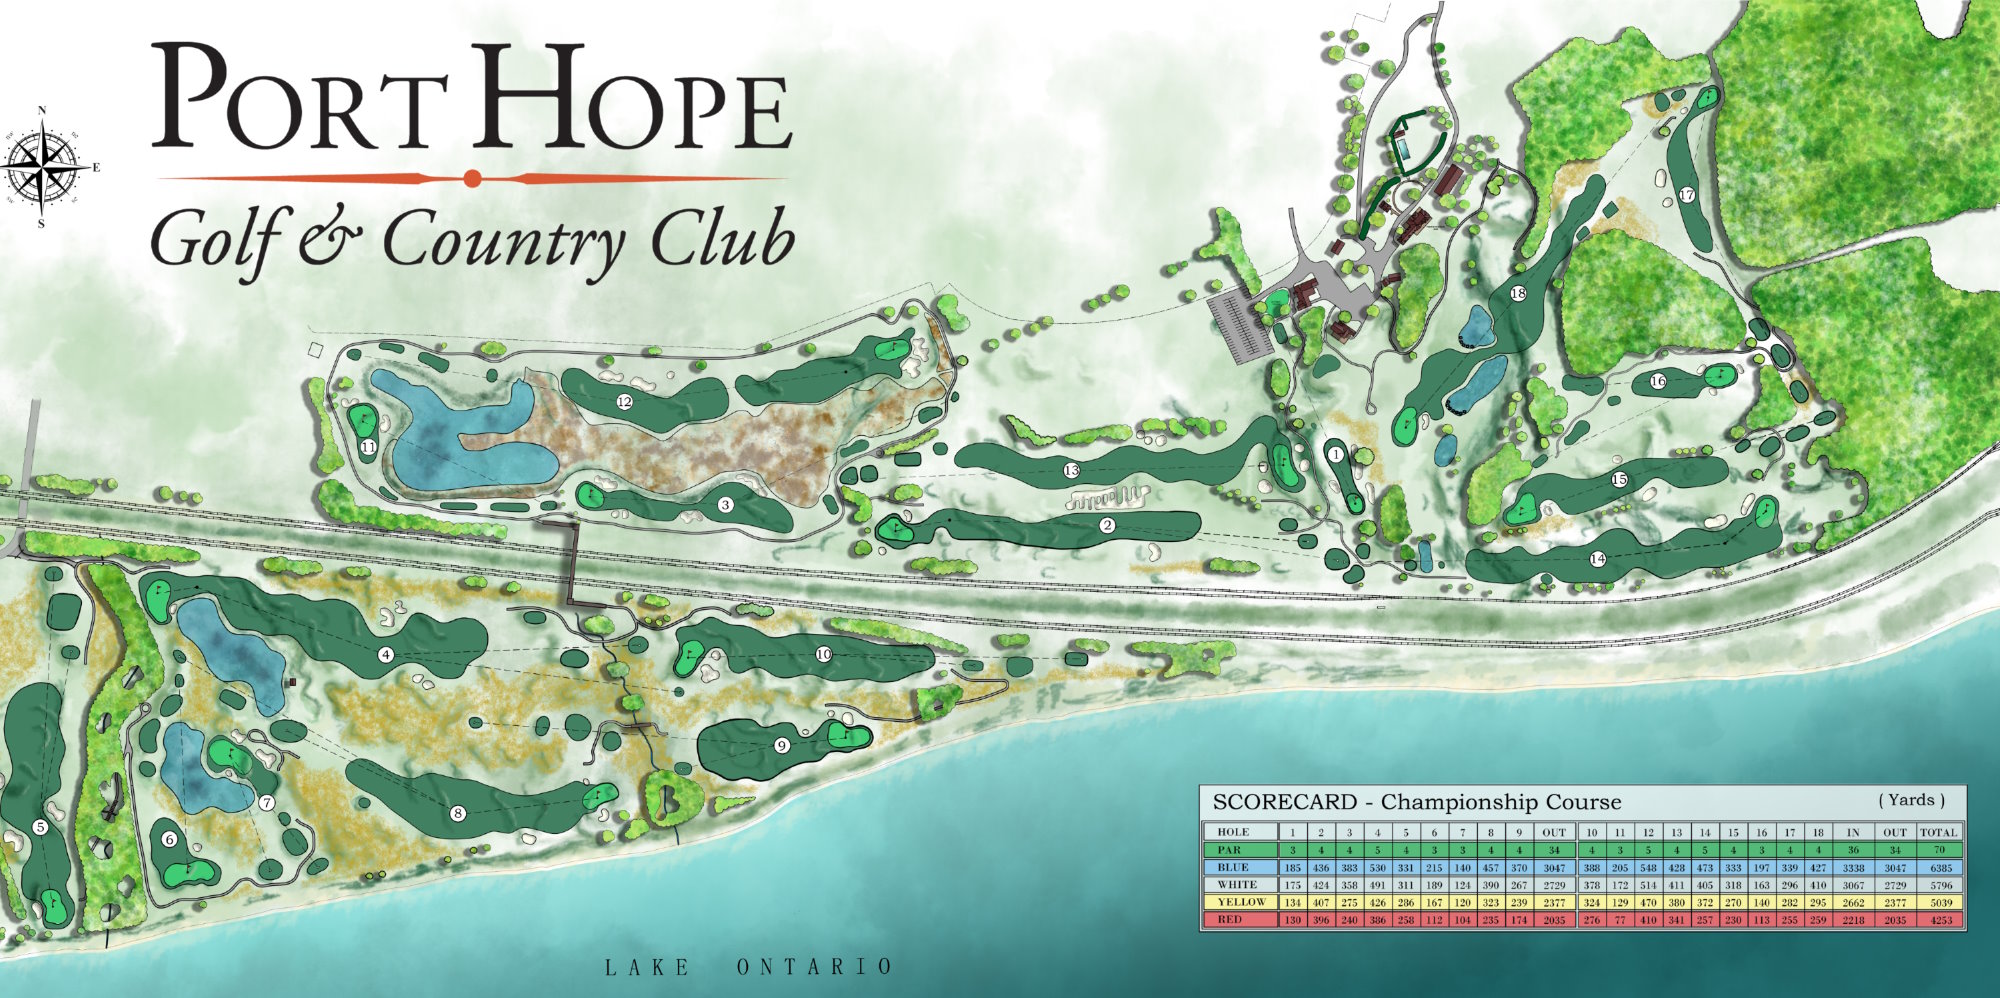 Golf Course Layout - Port Hope Golf and Country Club